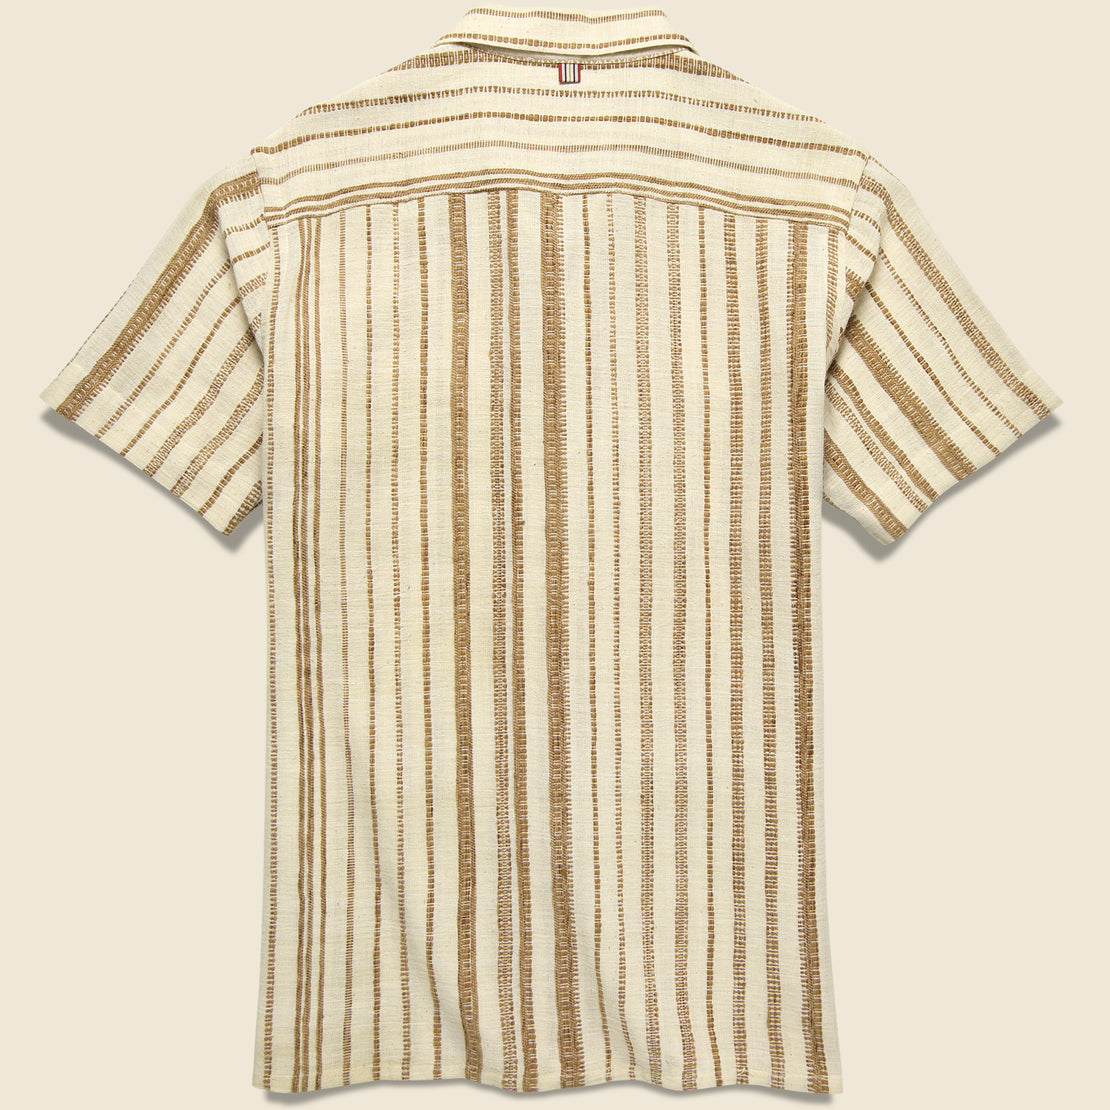 Alfred Handwoven Striped Guayabera Shirt - Natural/Tan - Kardo - STAG Provisions - Tops - S/S Woven - Stripe